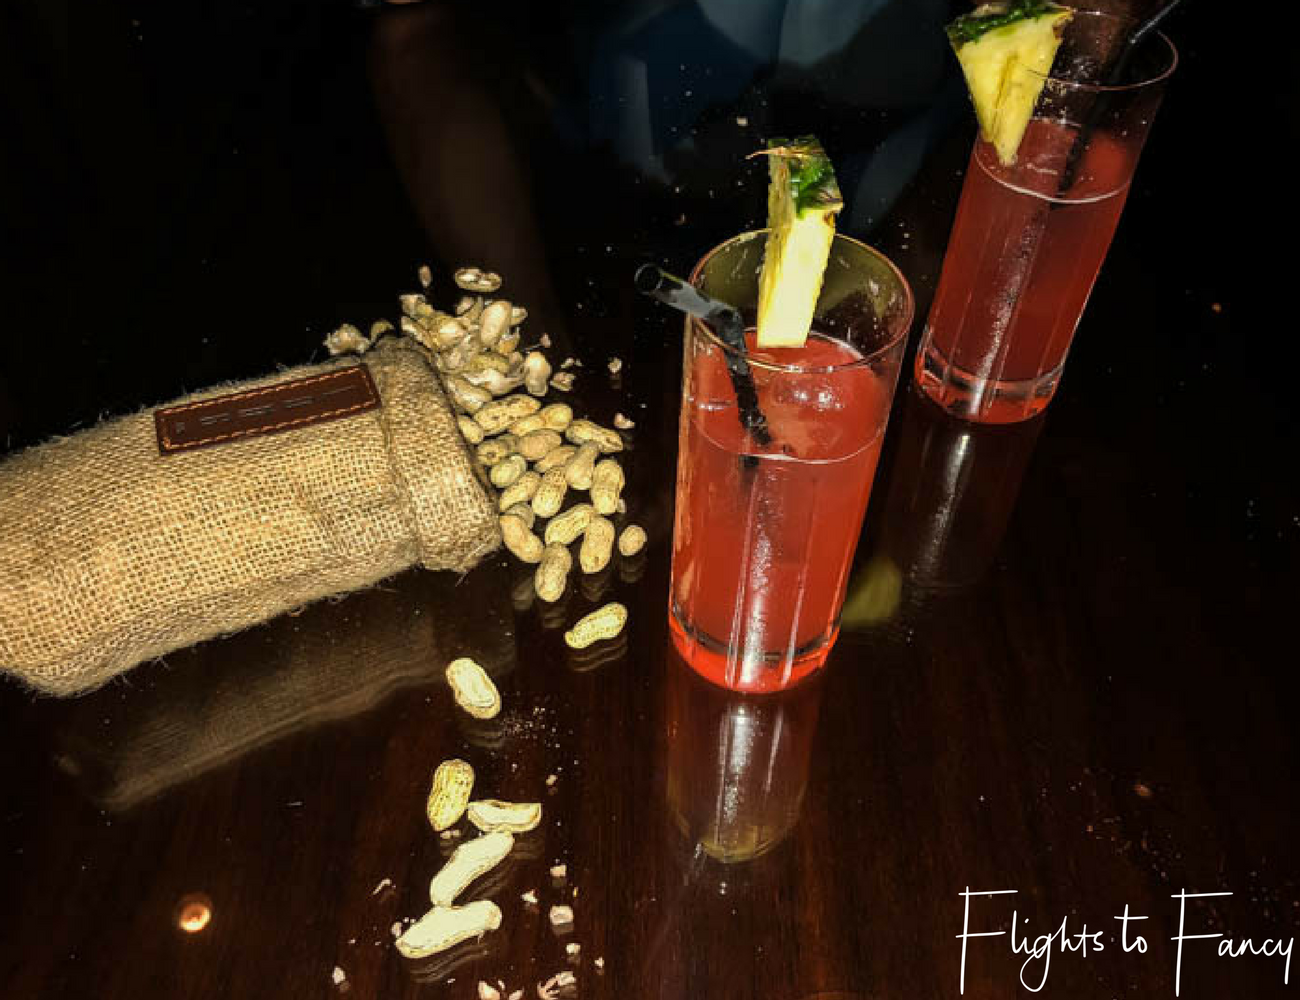 Flights To Fancy @ Raffles Makati Manila - The perfect combination of cocktails and peanuts